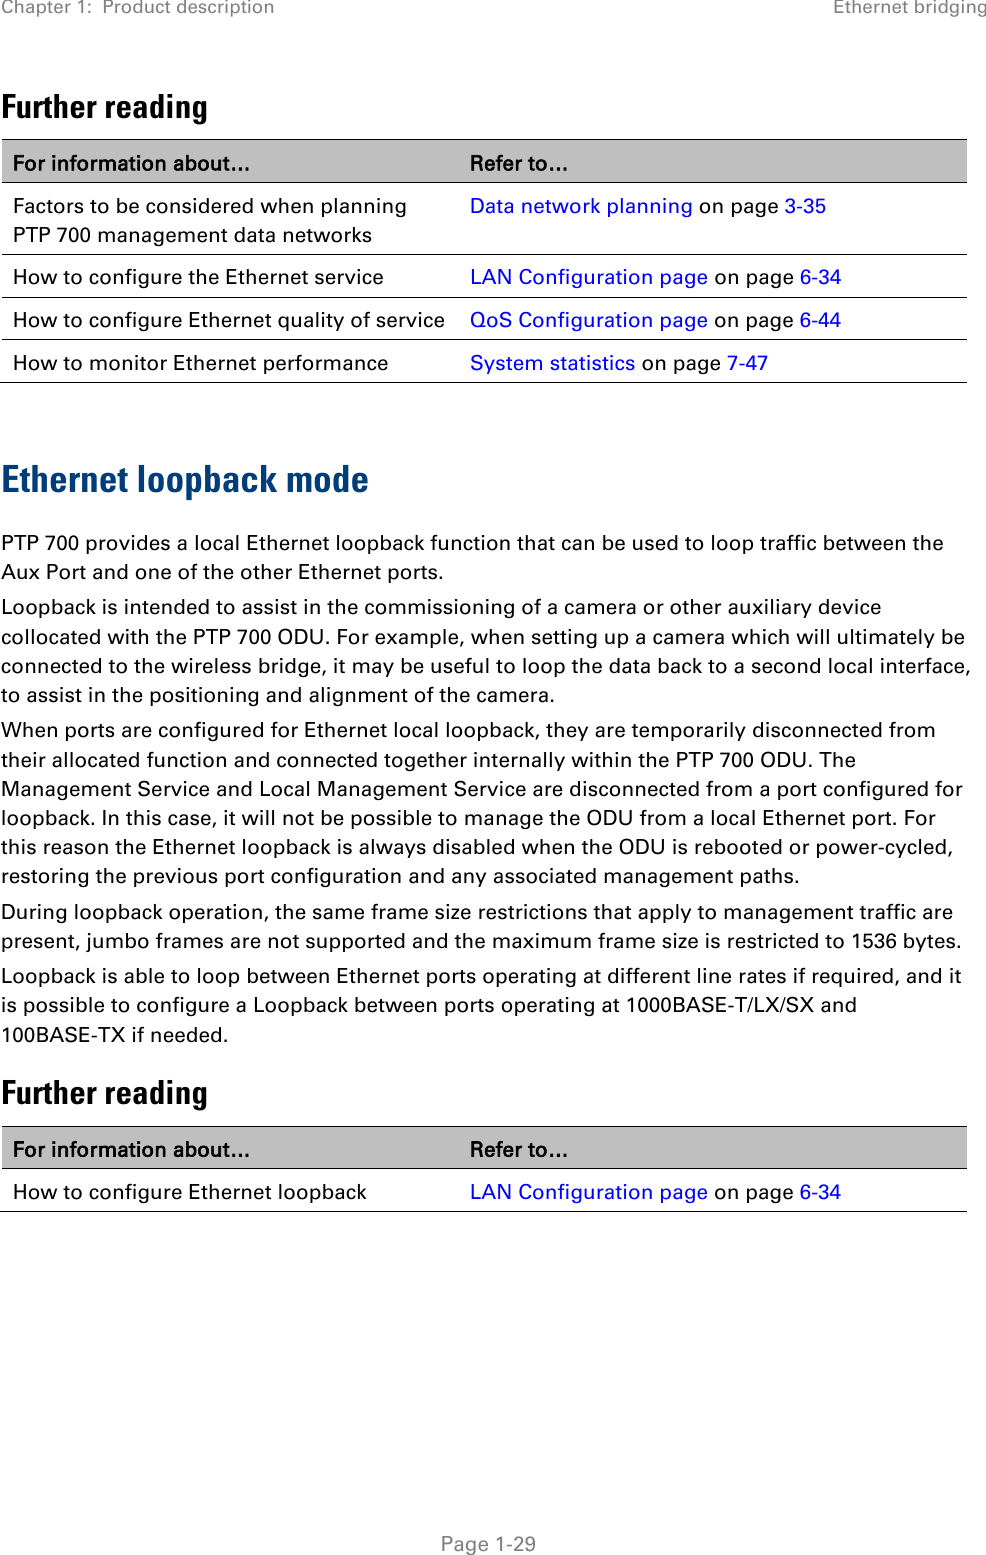 Chapter 1:  Product description Ethernet bridging  Further reading For information about… Refer to… Factors to be considered when planning PTP 700 management data networks Data network planning on page 3-35 How to configure the Ethernet service LAN Configuration page on page 6-34 How to configure Ethernet quality of service QoS Configuration page on page 6-44 How to monitor Ethernet performance System statistics on page 7-47  Ethernet loopback mode PTP 700 provides a local Ethernet loopback function that can be used to loop traffic between the Aux Port and one of the other Ethernet ports.  Loopback is intended to assist in the commissioning of a camera or other auxiliary device collocated with the PTP 700 ODU. For example, when setting up a camera which will ultimately be connected to the wireless bridge, it may be useful to loop the data back to a second local interface, to assist in the positioning and alignment of the camera. When ports are configured for Ethernet local loopback, they are temporarily disconnected from their allocated function and connected together internally within the PTP 700 ODU. The Management Service and Local Management Service are disconnected from a port configured for loopback. In this case, it will not be possible to manage the ODU from a local Ethernet port. For this reason the Ethernet loopback is always disabled when the ODU is rebooted or power-cycled, restoring the previous port configuration and any associated management paths. During loopback operation, the same frame size restrictions that apply to management traffic are present, jumbo frames are not supported and the maximum frame size is restricted to 1536 bytes. Loopback is able to loop between Ethernet ports operating at different line rates if required, and it is possible to configure a Loopback between ports operating at 1000BASE-T/LX/SX and 100BASE-TX if needed. Further reading For information about… Refer to… How to configure Ethernet loopback LAN Configuration page on page 6-34      Page 1-29 